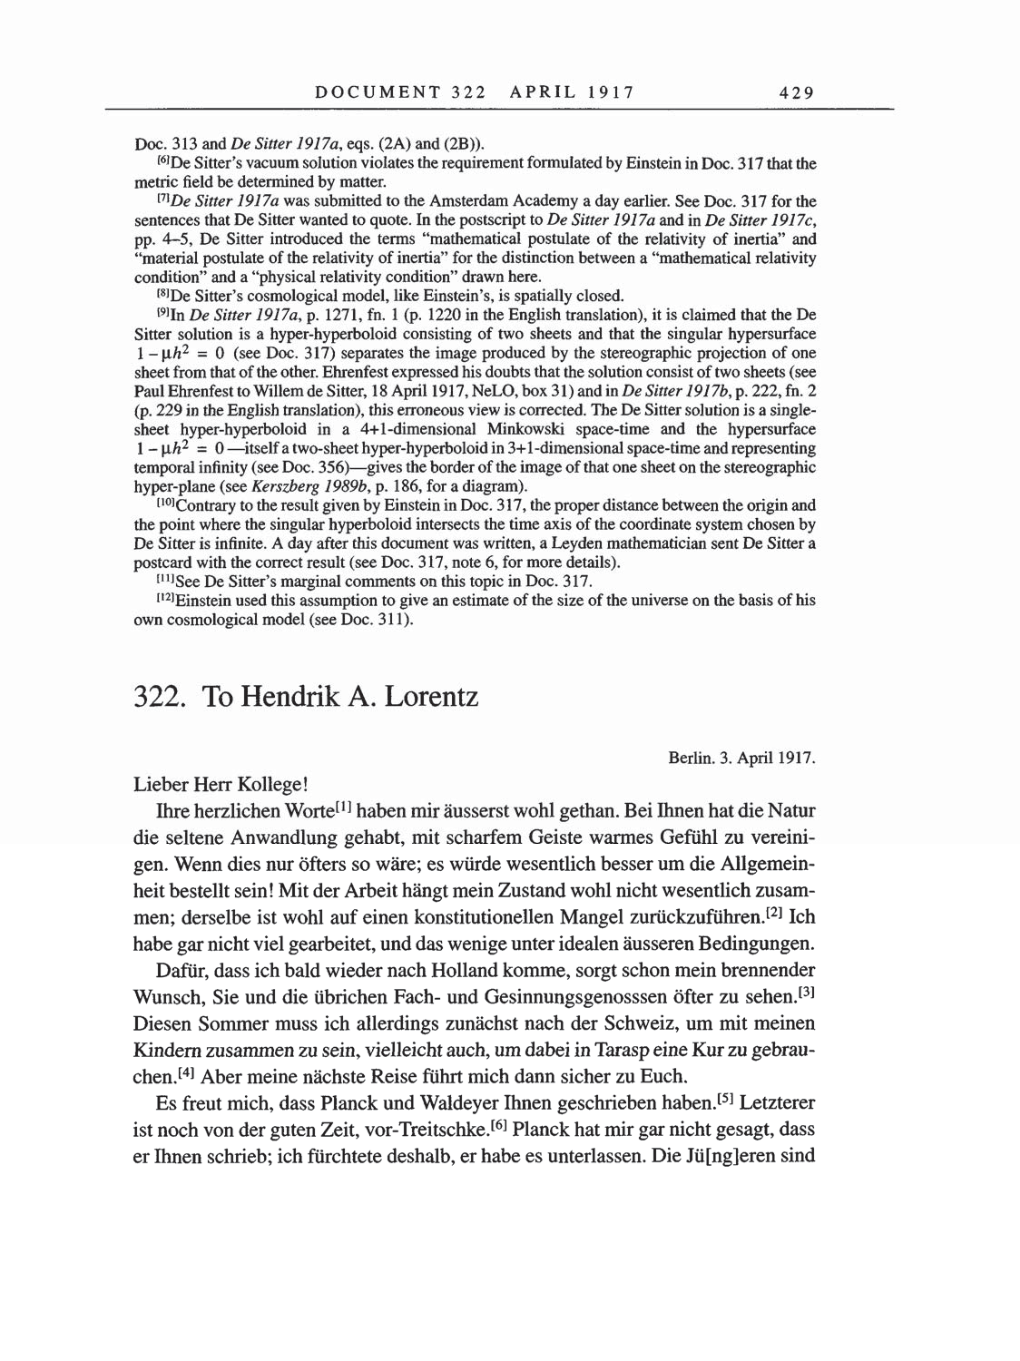 Volume 8, Part A: The Berlin Years: Correspondence 1914-1917 page 429